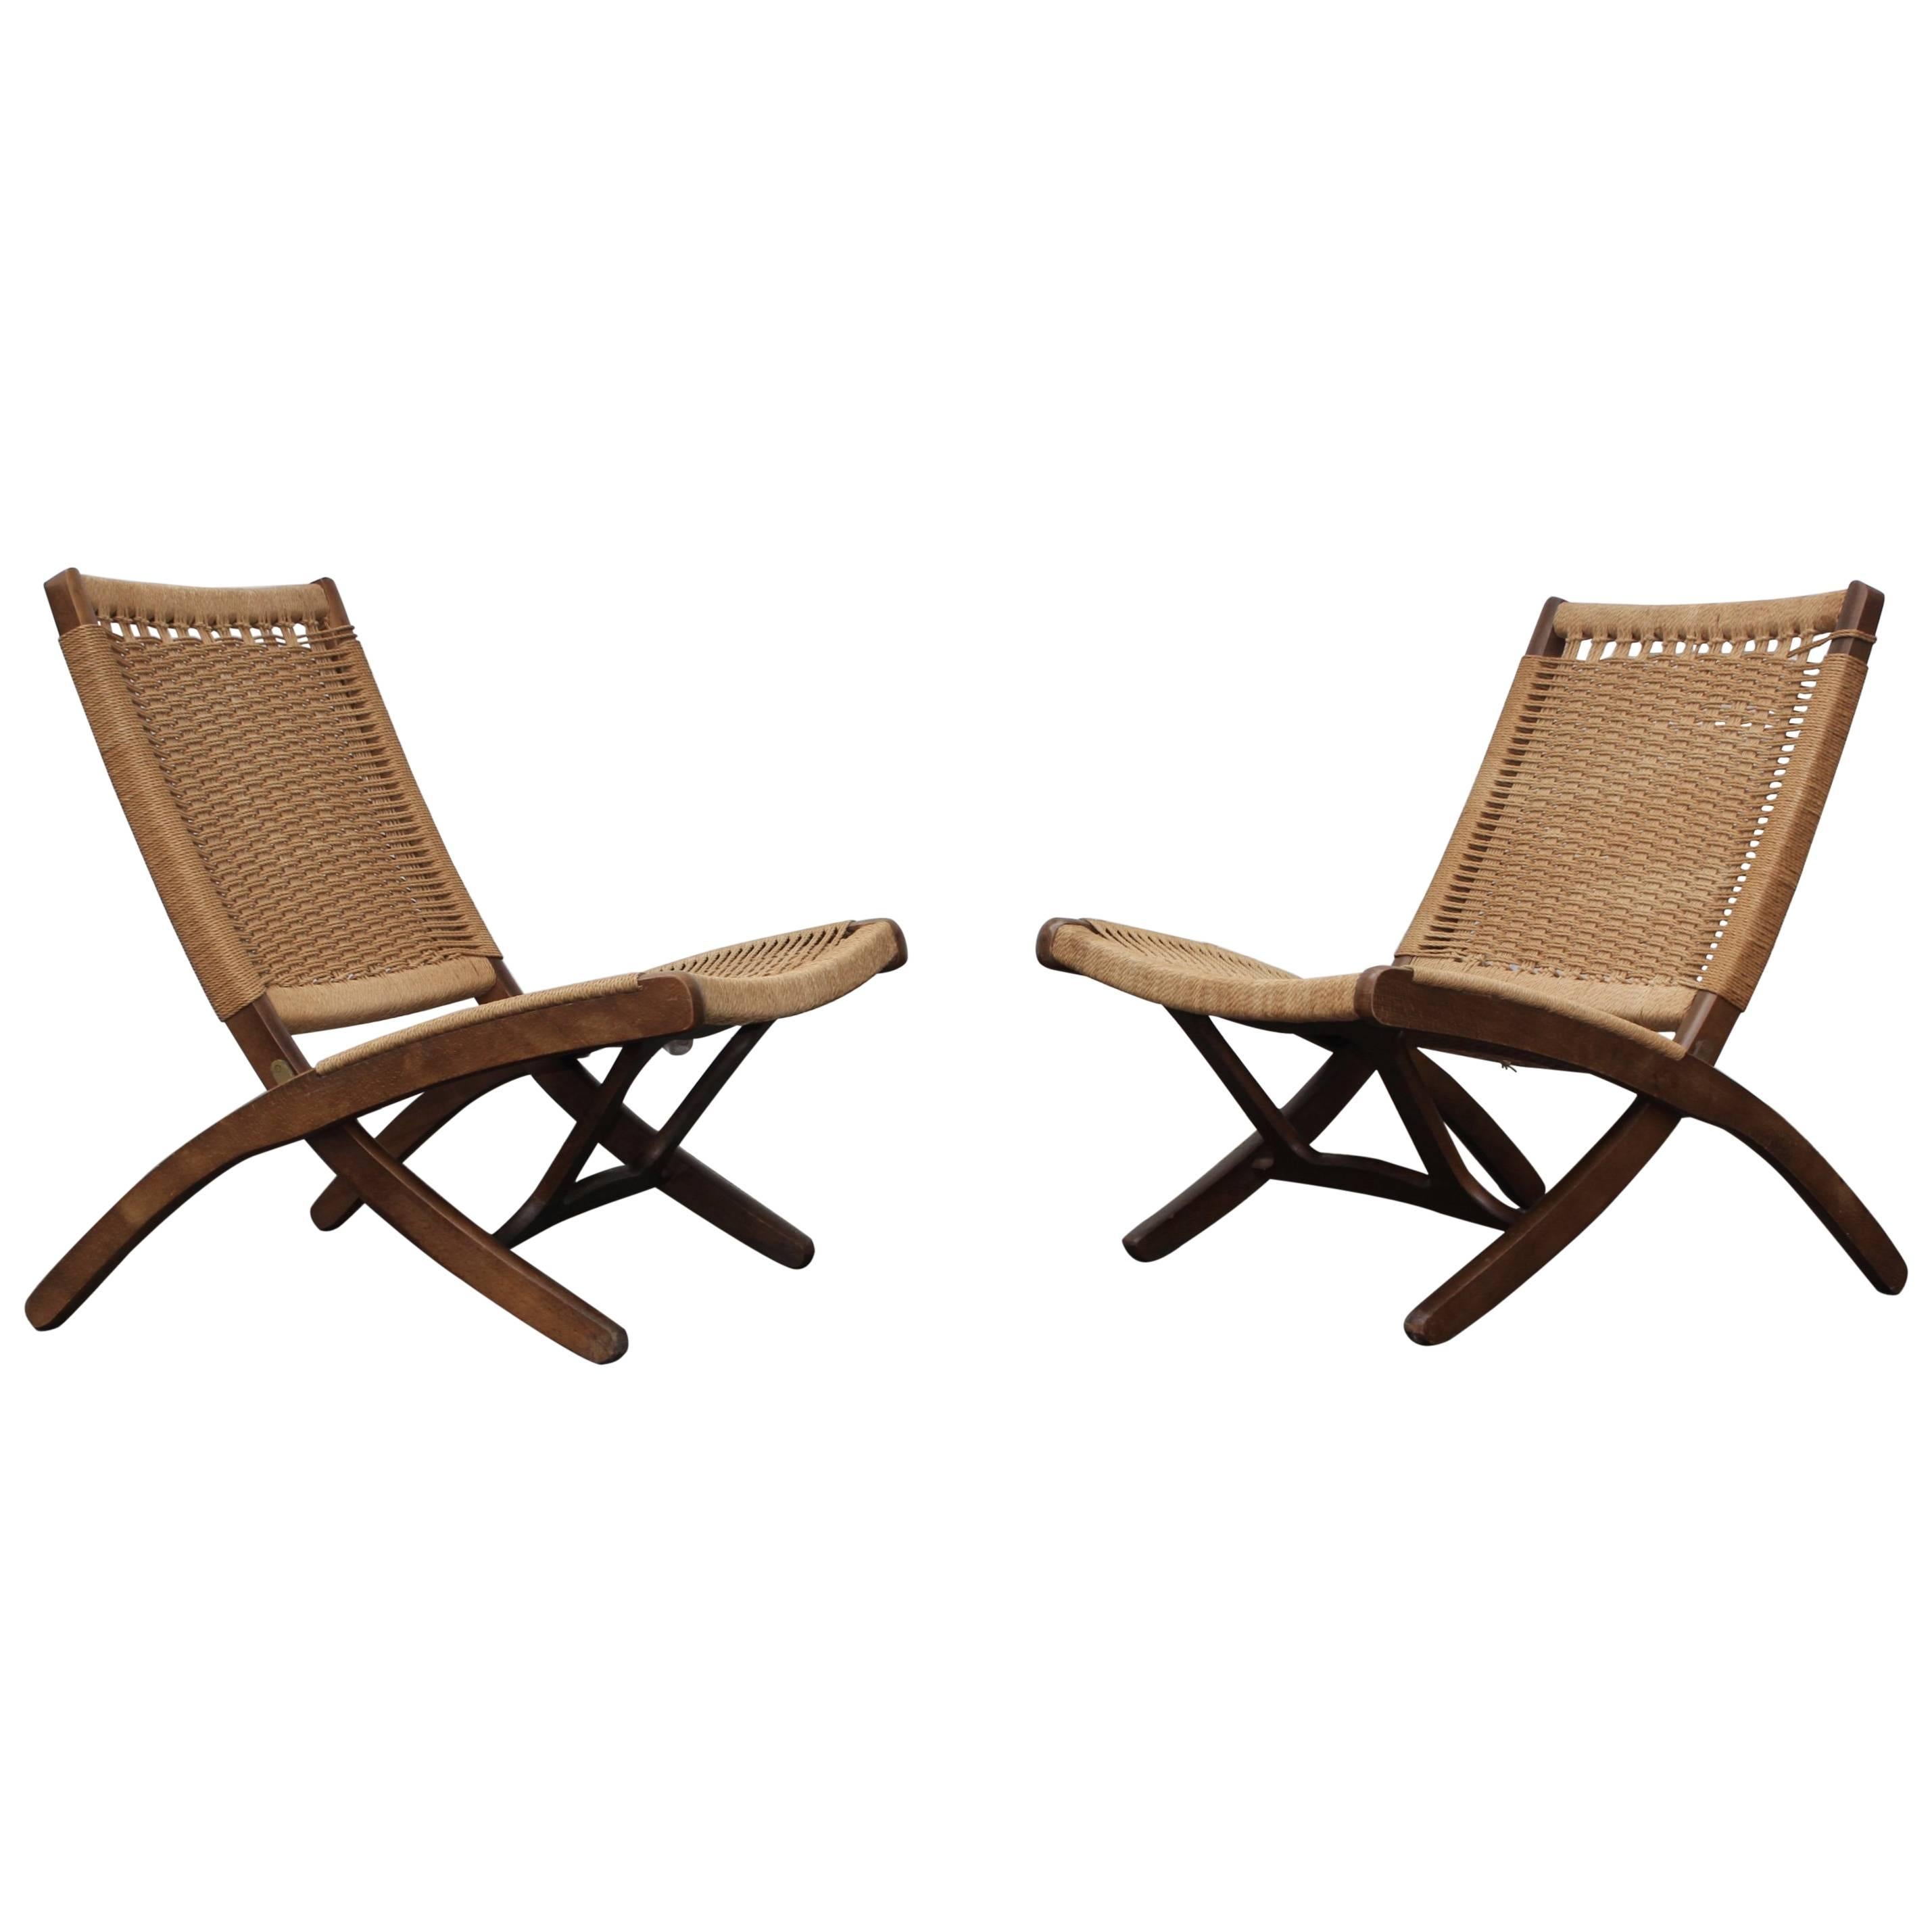 1960s Folding Rope Lounge Chairs